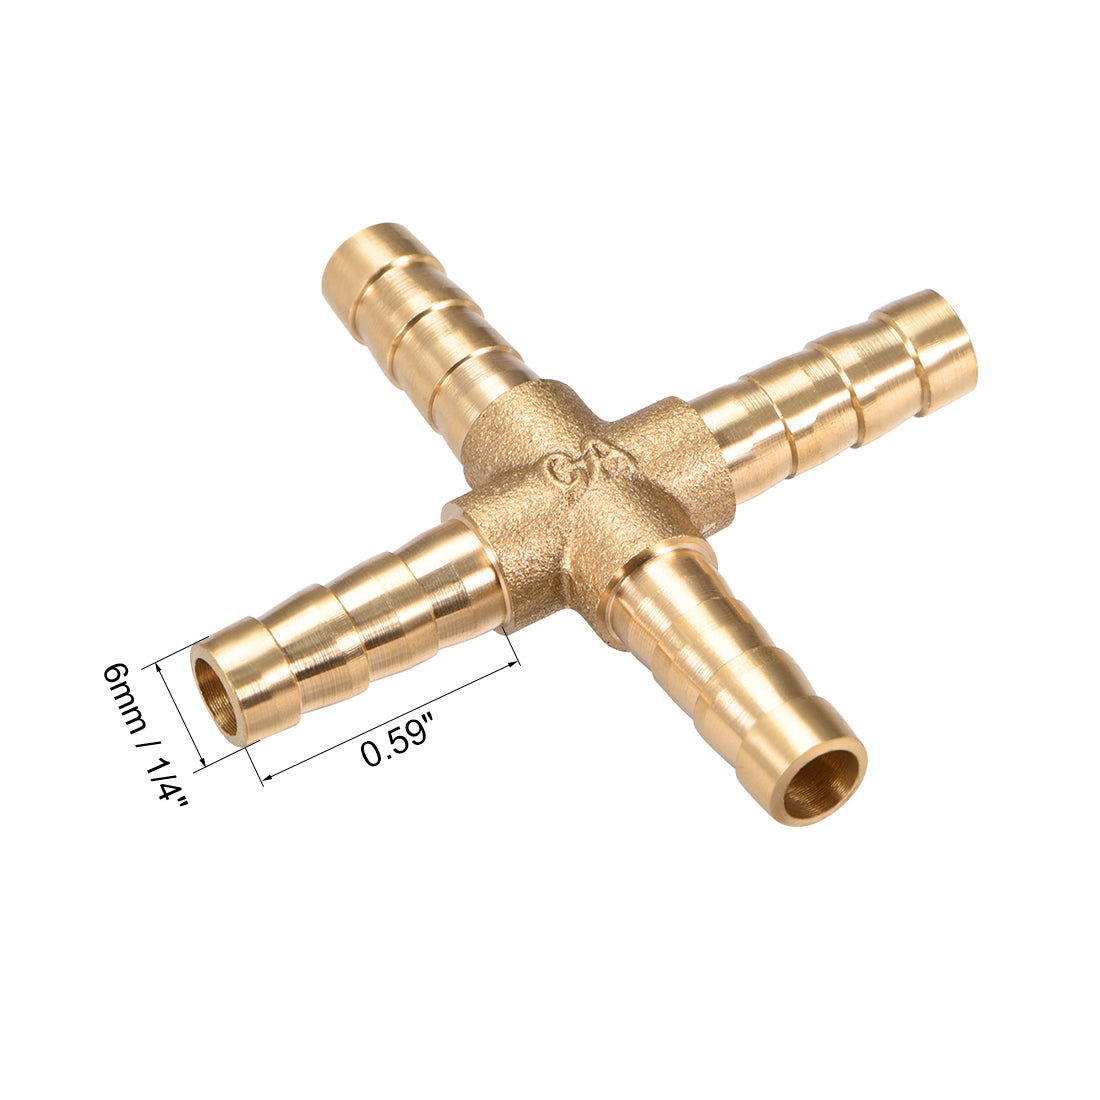 Uxcell Uxcell 8mm or 5/16" ID Brass Barb Splicer Fitting 4 Ways Brass Cross Barb Fitting